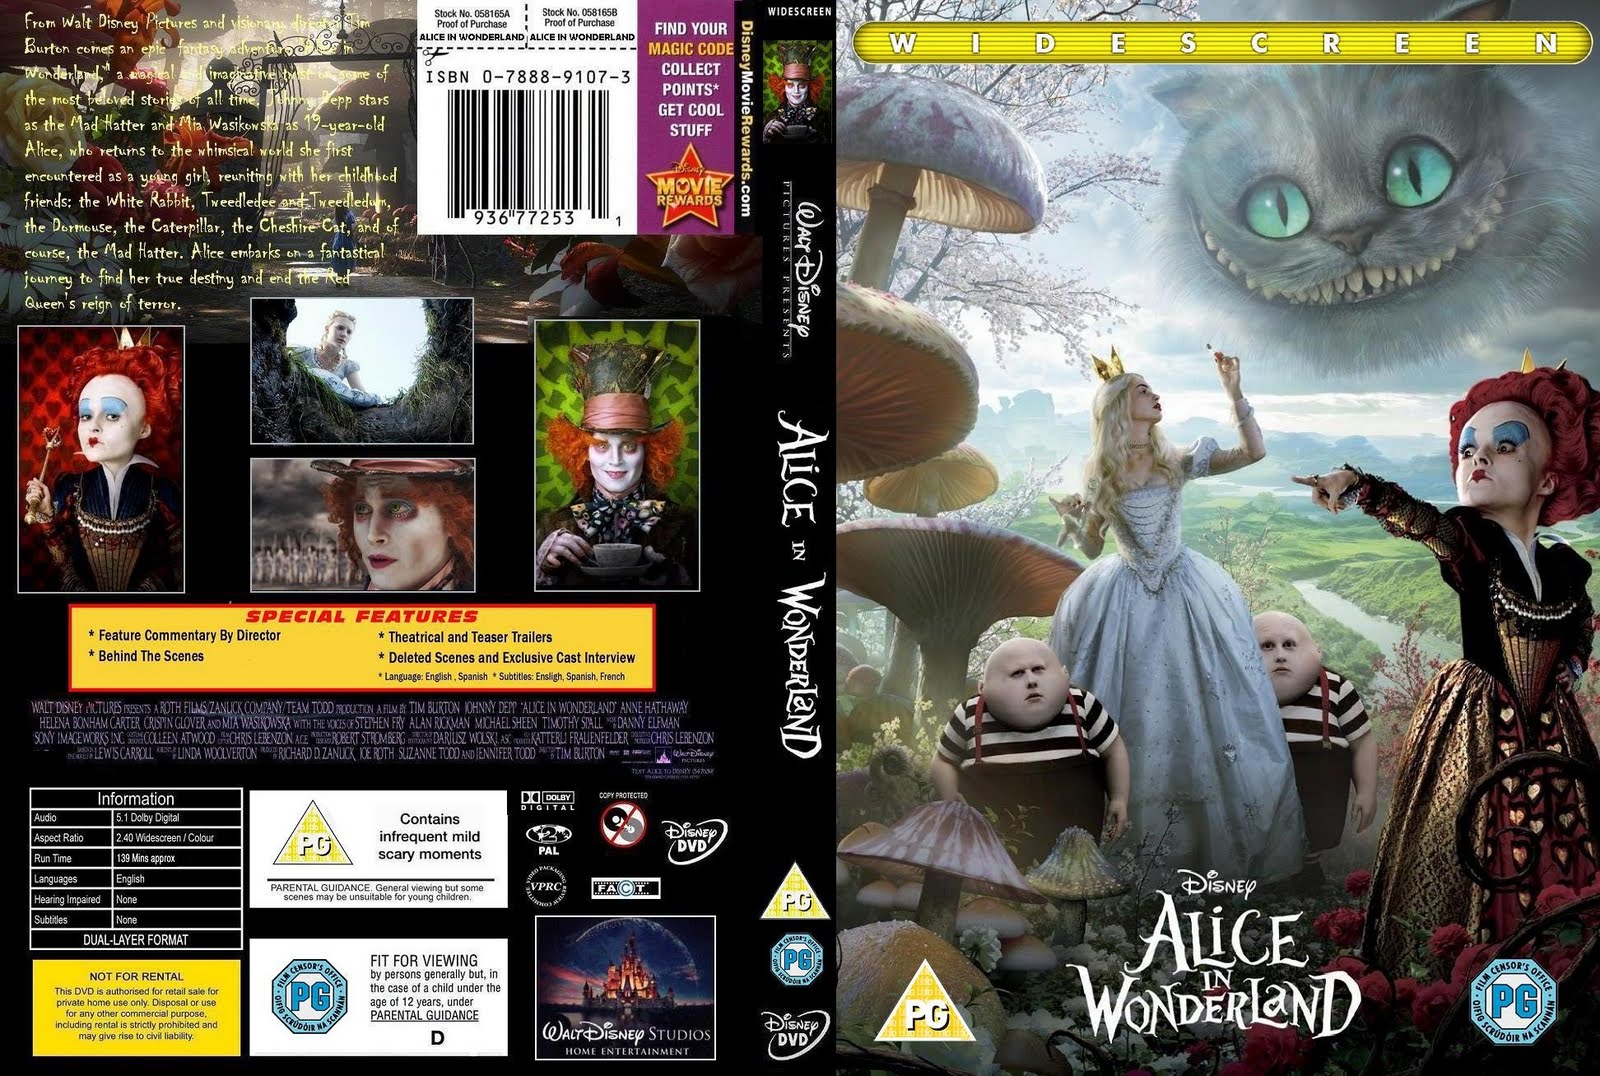 the Alice Through the Looking Glass (English) full movie  720p